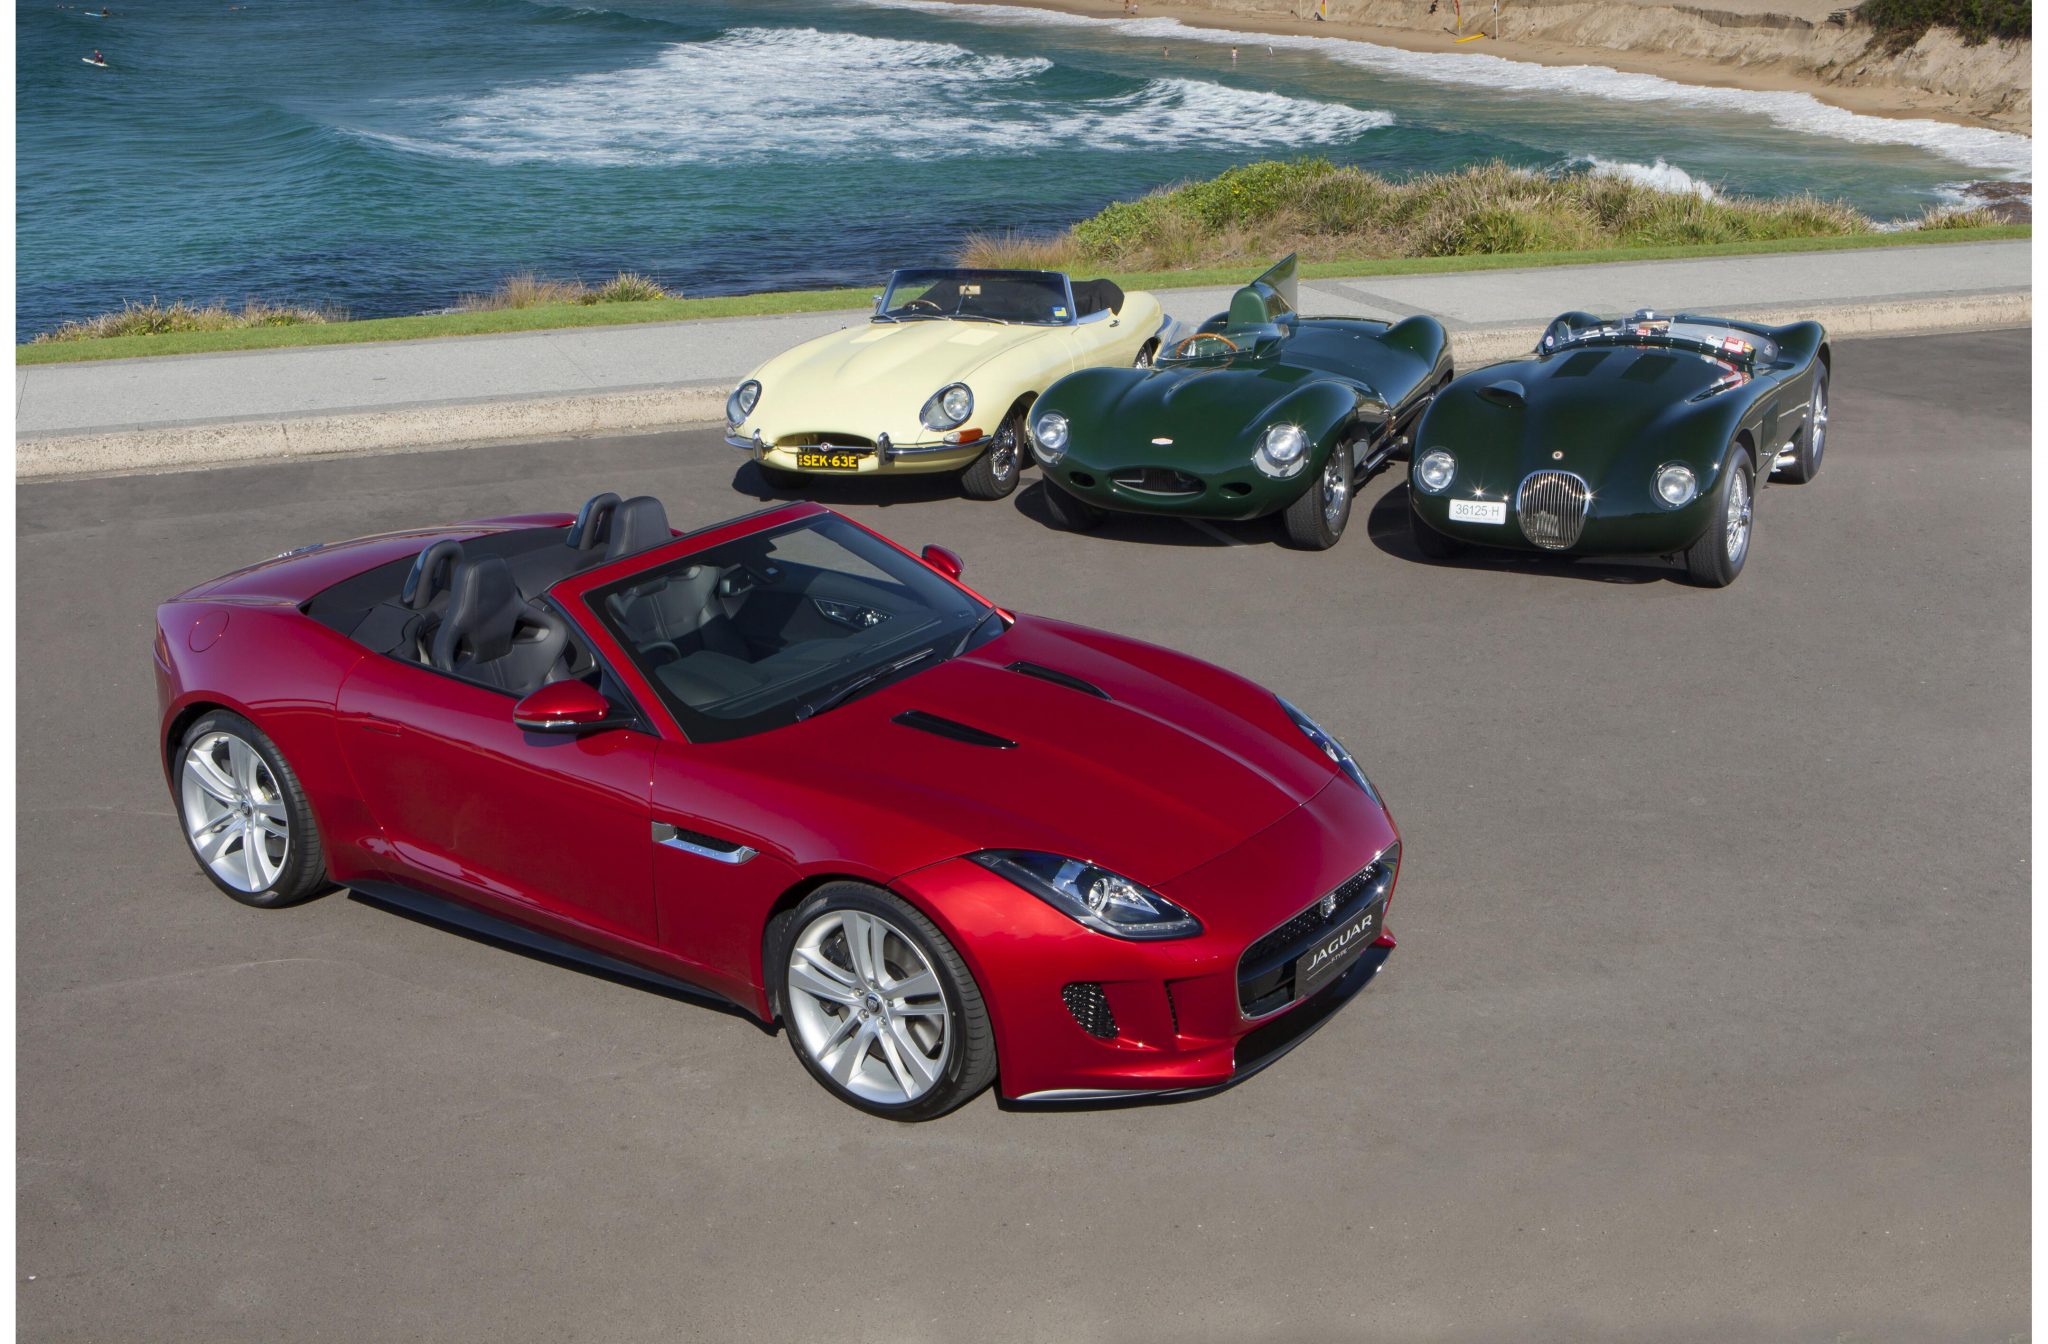 Jaguar F-Type Price & Specs announced – from $139,000 - ForceGT.com2048 x 1344